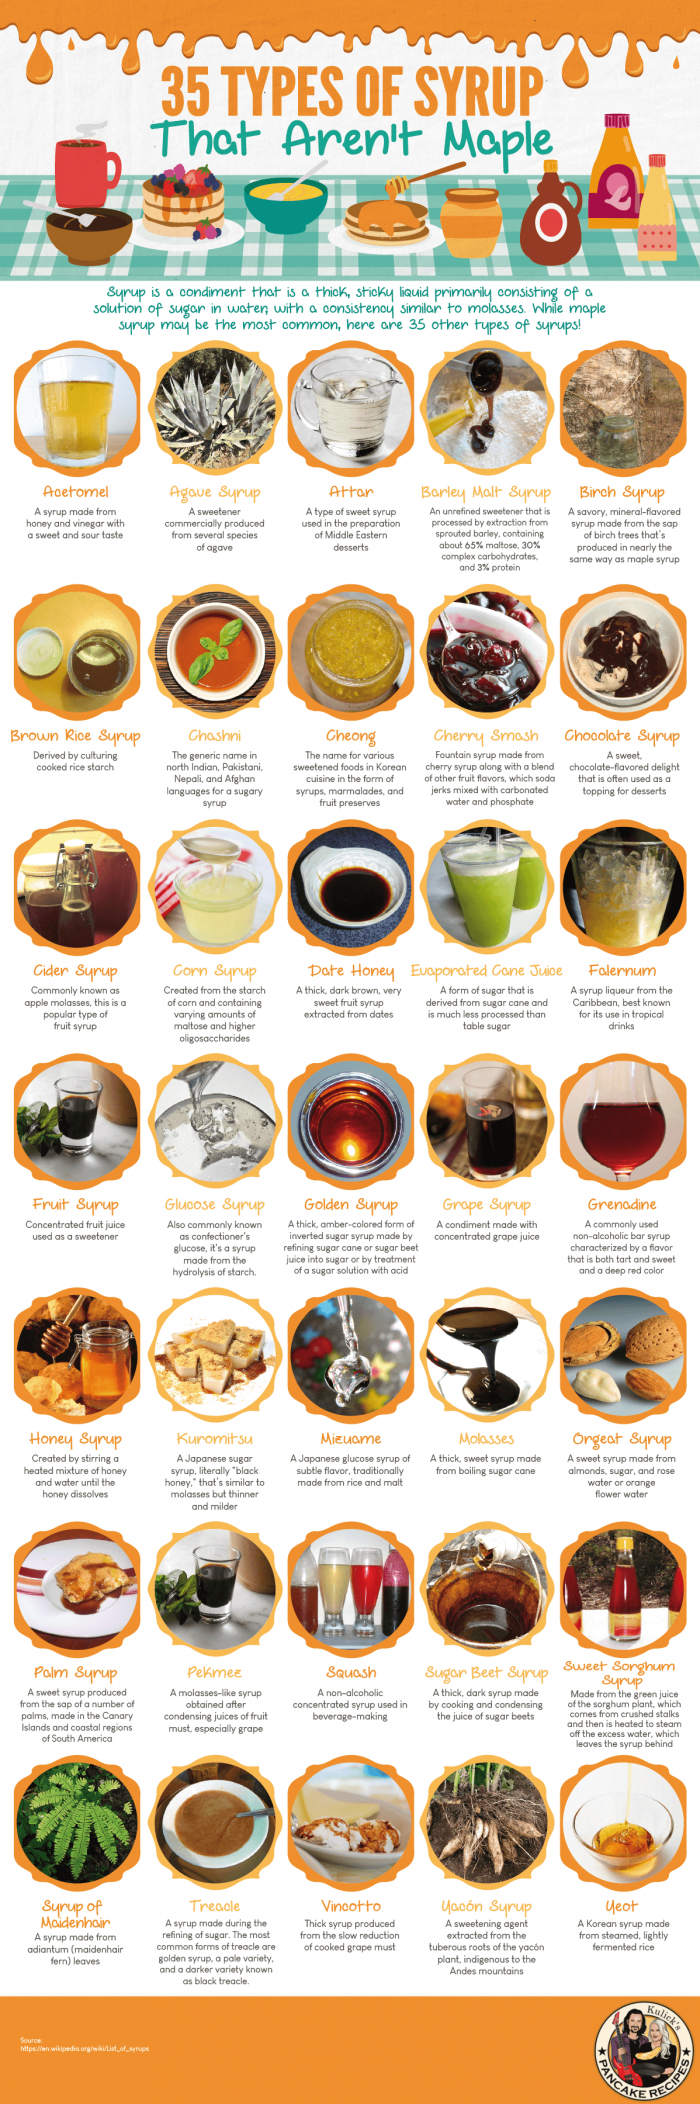 The Top 35 Types of Syrup That Aren’t Maple